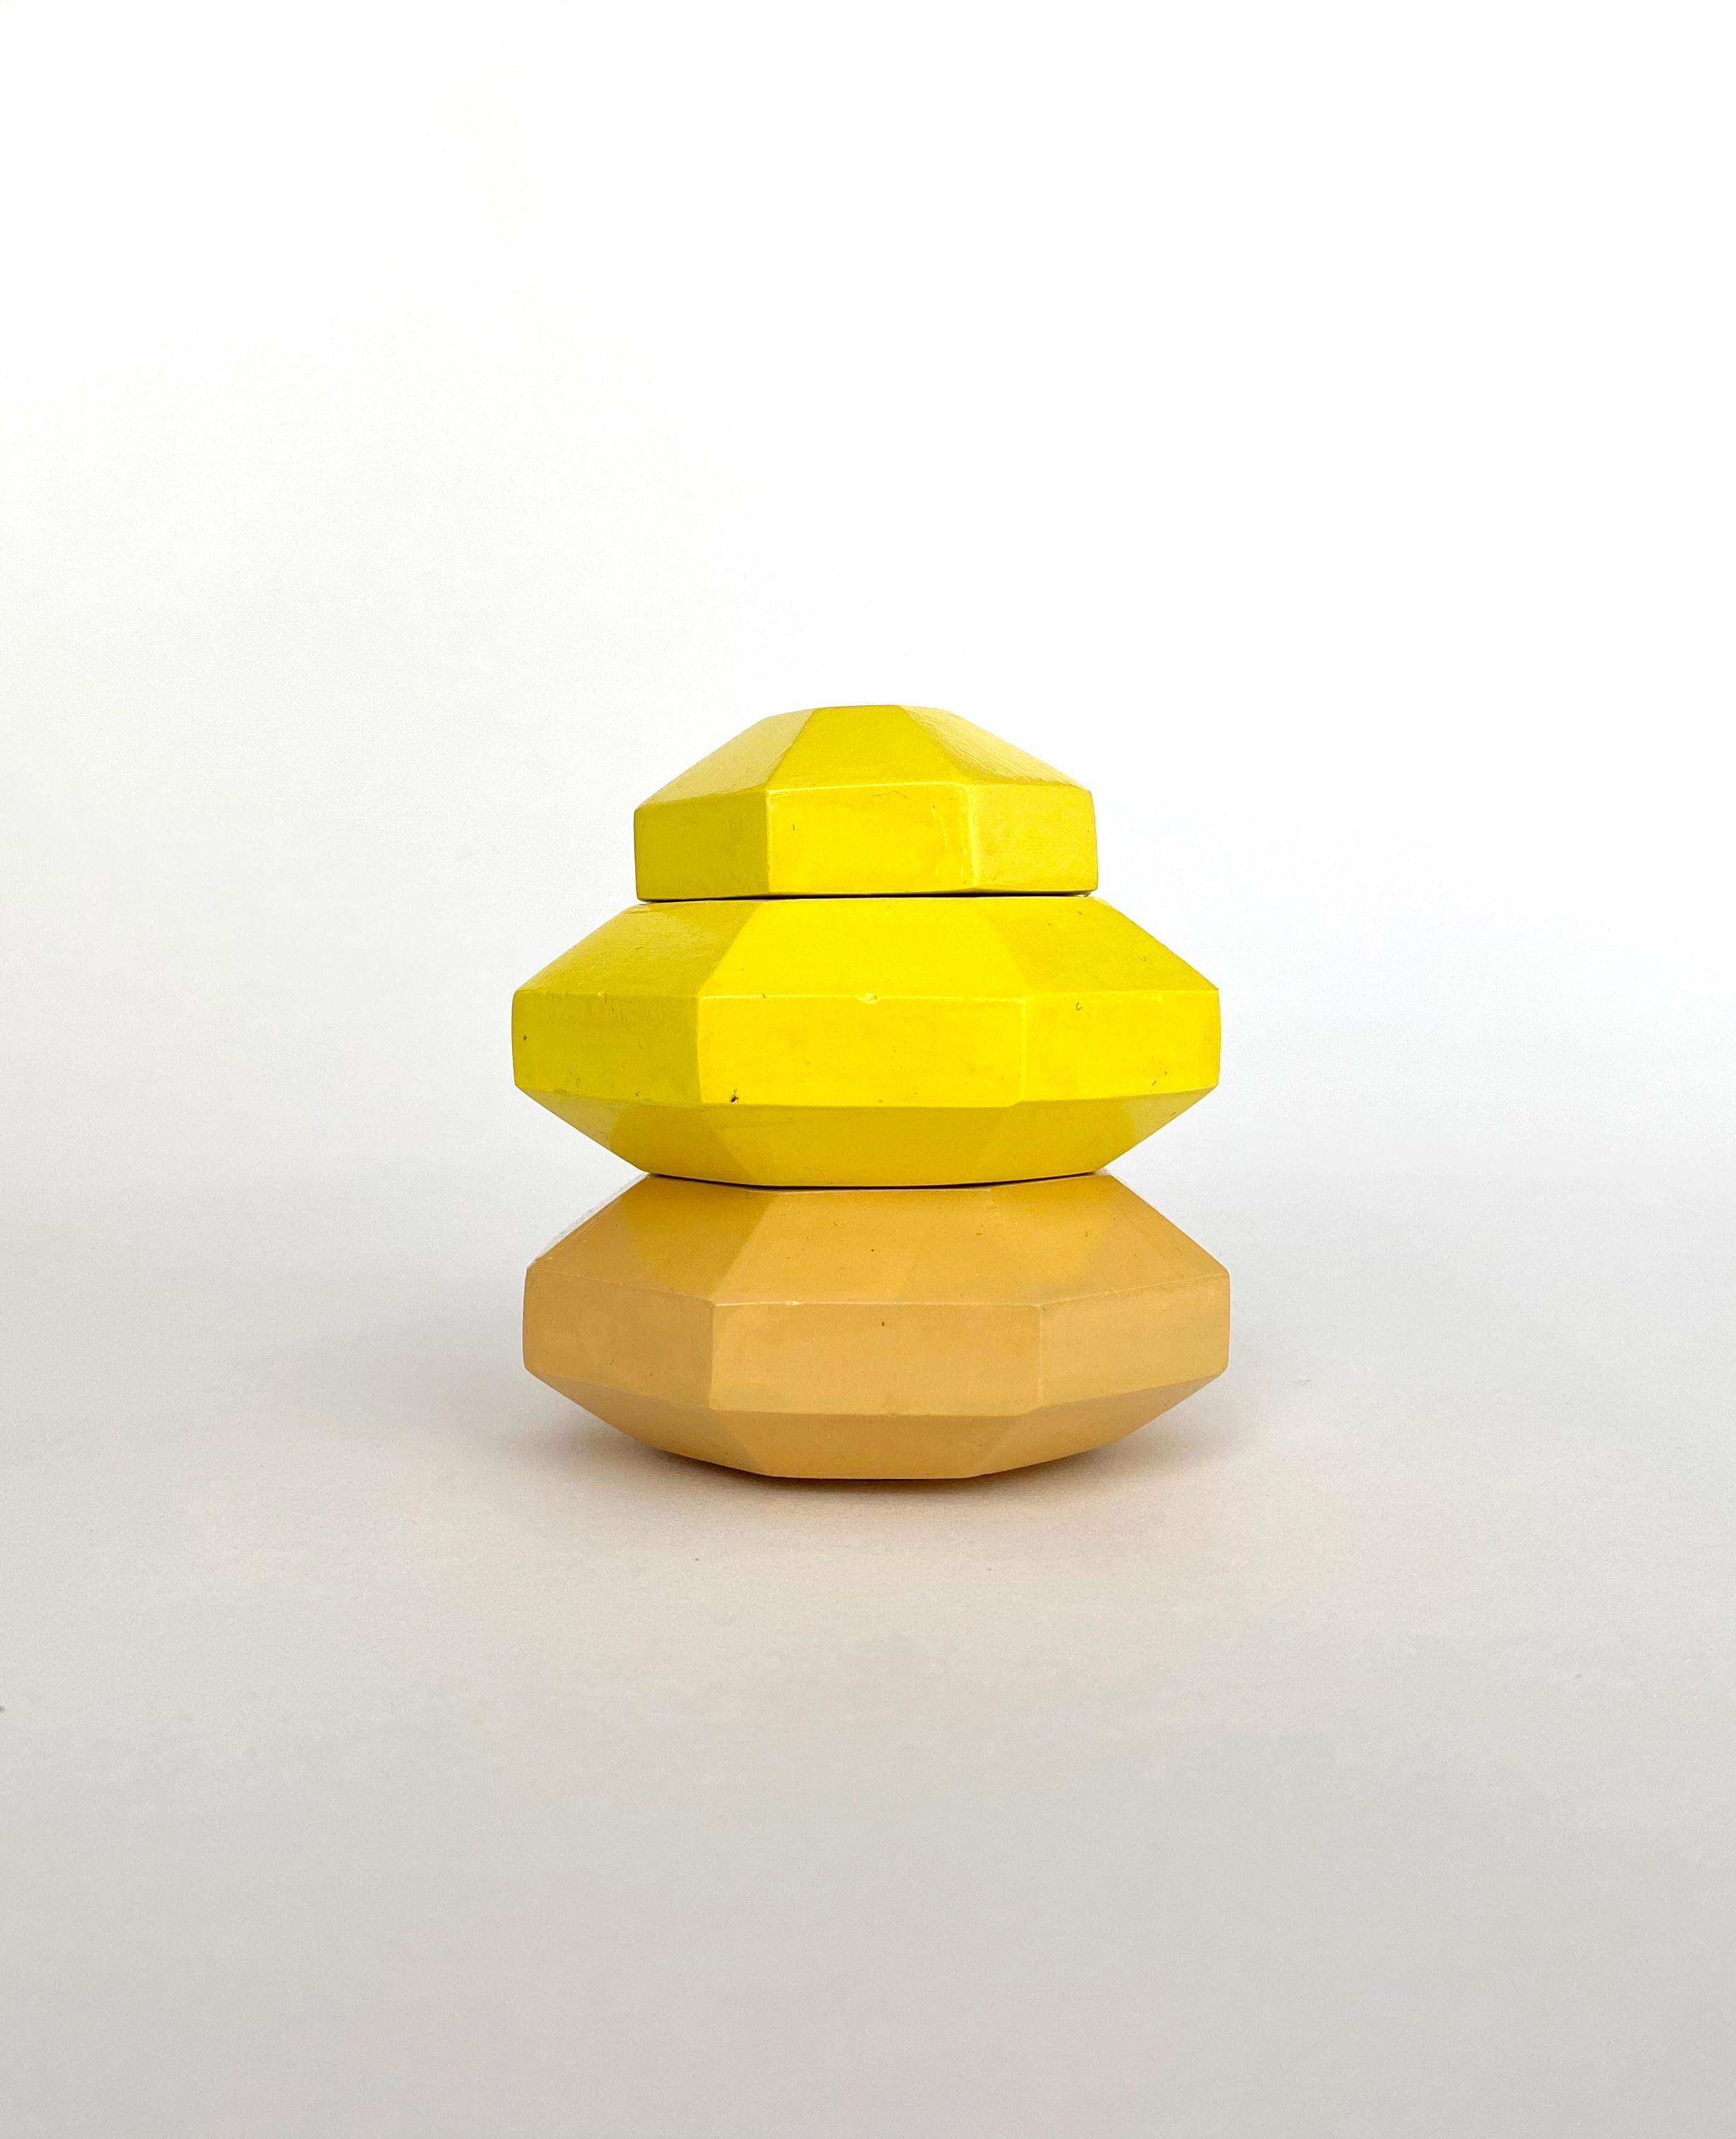 Ceramic nomad jar disco tower by Gilles & Cecilie
Unique
Dimensions: H 8 x W 7.5 cm
Material: Ceramic painted two tone yellow

Gilles and Cecilie Studio created the Nomad Jar Family to explore drawing in three dimensions. The series of objects